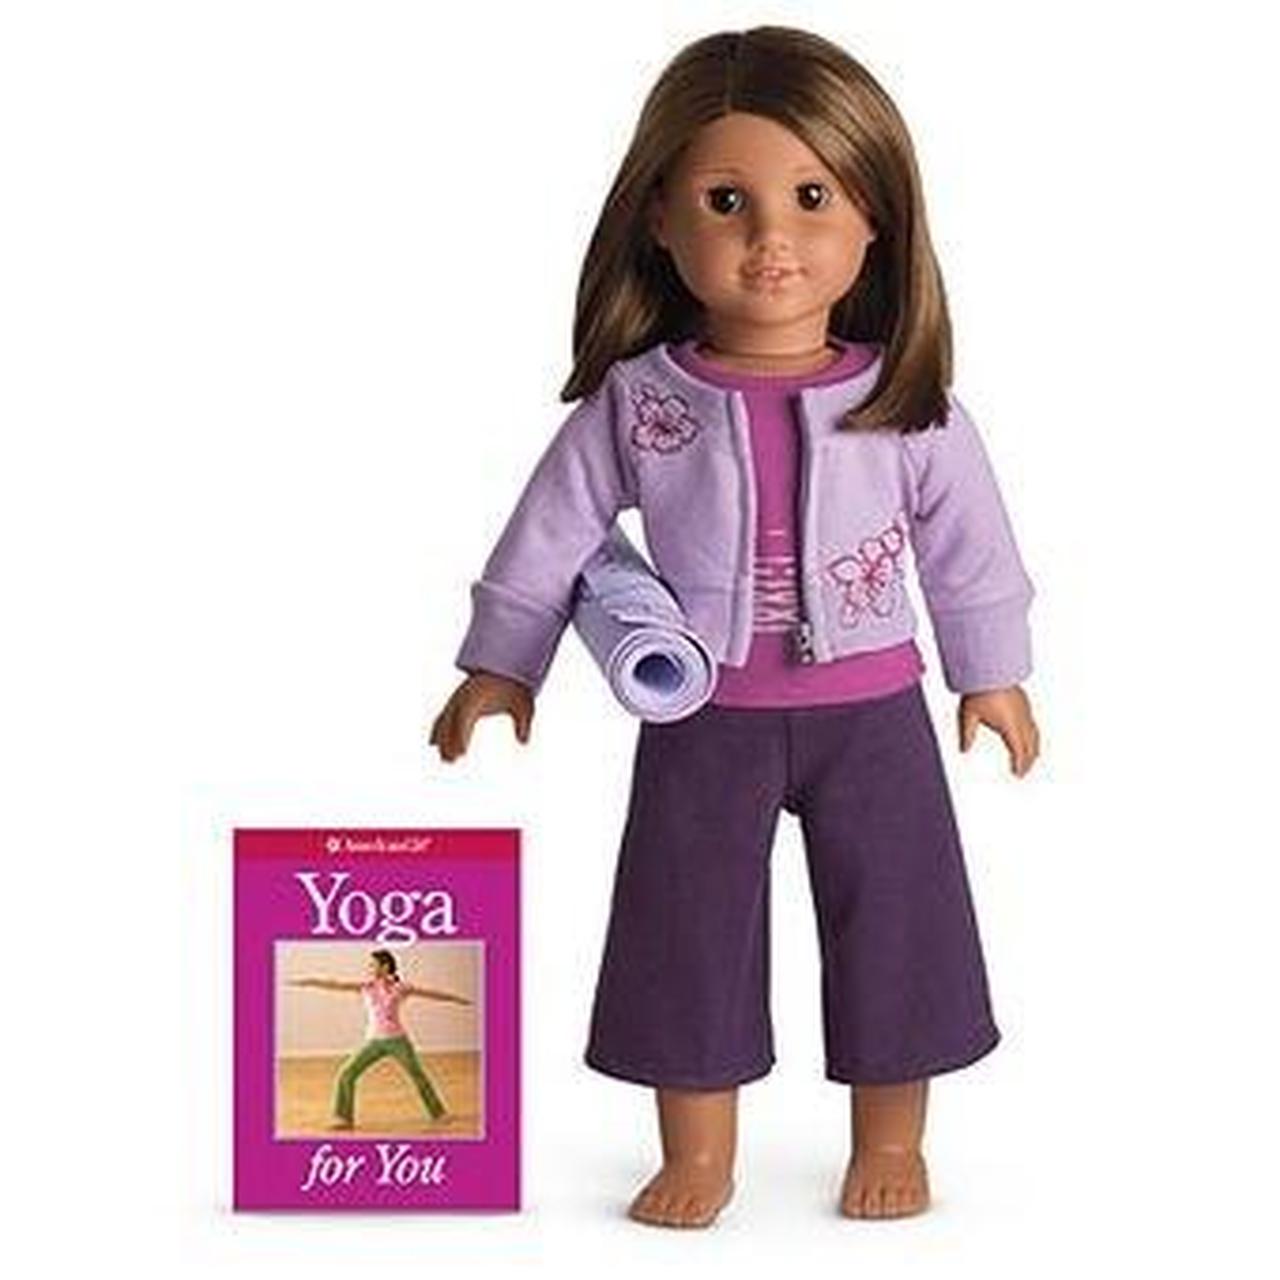 RETIRED American Girl Doll Yoga Outfit